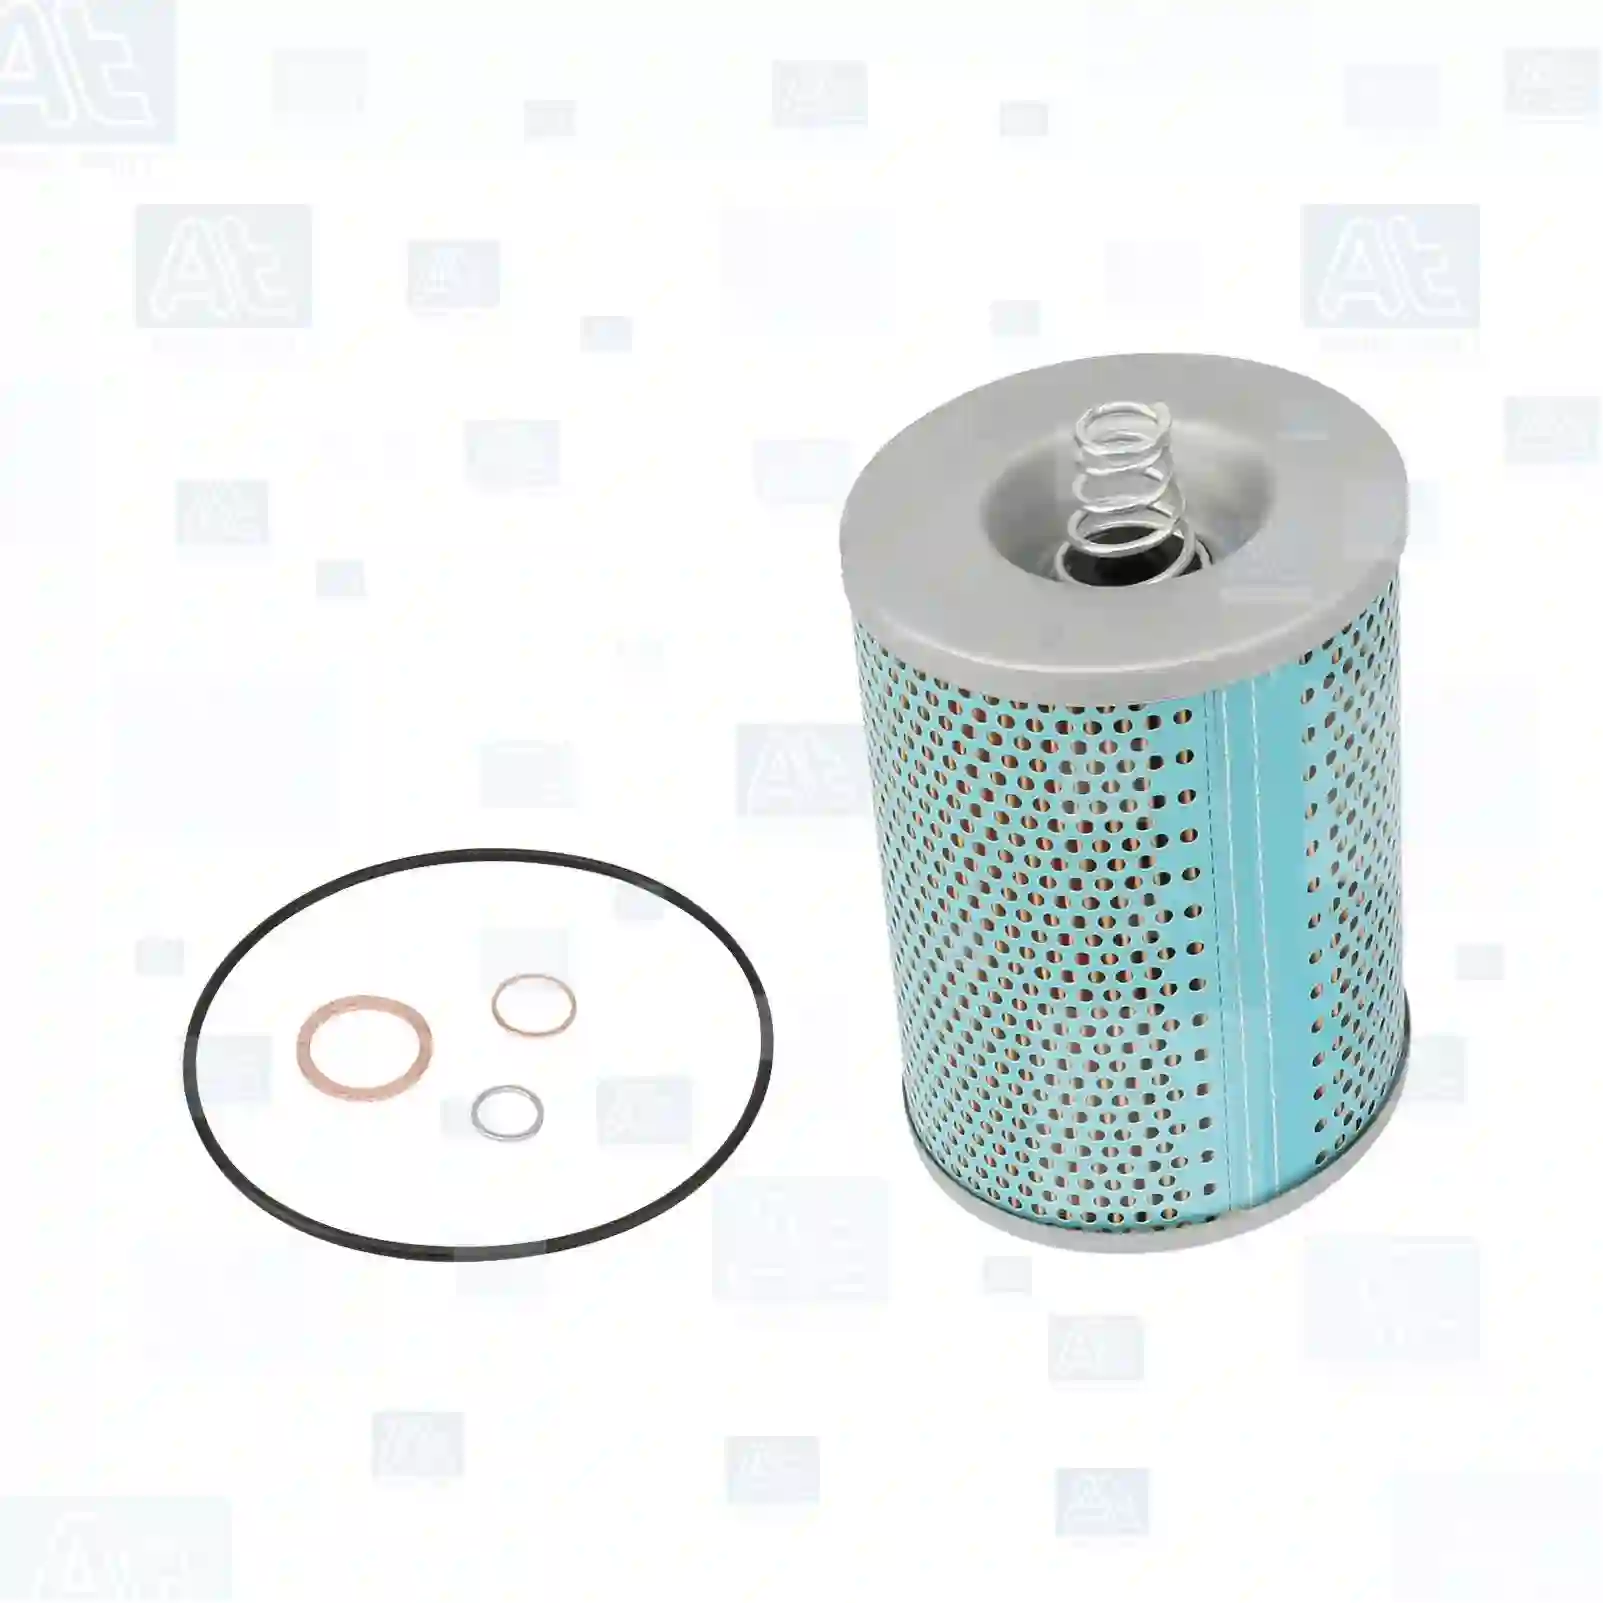 Oil filter insert, at no 77702565, oem no: 3621800110, 4011800009, 4011840025, 0001335290, 0001335291, ABU8548, ABU8959, 76013100, 5011427, 5011428, 7002914, 51055040028, 51055040048, 51055040049, 51055040068, 51055040084, 51055040085, 51055040086, 51055040091, 81000000239, 81055040030, 81055040038, 81055040040, N1011002592, 0001840425, 0011840125, 0011840225, 0011840425, 0011840525, 0011843725, 0352470092, 3621800110, 4011800009, 4011800025, 4011840025, 5000242510, 5001846630, 6005019816, LU8009, 8311999137, 8319000110 At Spare Part | Engine, Accelerator Pedal, Camshaft, Connecting Rod, Crankcase, Crankshaft, Cylinder Head, Engine Suspension Mountings, Exhaust Manifold, Exhaust Gas Recirculation, Filter Kits, Flywheel Housing, General Overhaul Kits, Engine, Intake Manifold, Oil Cleaner, Oil Cooler, Oil Filter, Oil Pump, Oil Sump, Piston & Liner, Sensor & Switch, Timing Case, Turbocharger, Cooling System, Belt Tensioner, Coolant Filter, Coolant Pipe, Corrosion Prevention Agent, Drive, Expansion Tank, Fan, Intercooler, Monitors & Gauges, Radiator, Thermostat, V-Belt / Timing belt, Water Pump, Fuel System, Electronical Injector Unit, Feed Pump, Fuel Filter, cpl., Fuel Gauge Sender,  Fuel Line, Fuel Pump, Fuel Tank, Injection Line Kit, Injection Pump, Exhaust System, Clutch & Pedal, Gearbox, Propeller Shaft, Axles, Brake System, Hubs & Wheels, Suspension, Leaf Spring, Universal Parts / Accessories, Steering, Electrical System, Cabin Oil filter insert, at no 77702565, oem no: 3621800110, 4011800009, 4011840025, 0001335290, 0001335291, ABU8548, ABU8959, 76013100, 5011427, 5011428, 7002914, 51055040028, 51055040048, 51055040049, 51055040068, 51055040084, 51055040085, 51055040086, 51055040091, 81000000239, 81055040030, 81055040038, 81055040040, N1011002592, 0001840425, 0011840125, 0011840225, 0011840425, 0011840525, 0011843725, 0352470092, 3621800110, 4011800009, 4011800025, 4011840025, 5000242510, 5001846630, 6005019816, LU8009, 8311999137, 8319000110 At Spare Part | Engine, Accelerator Pedal, Camshaft, Connecting Rod, Crankcase, Crankshaft, Cylinder Head, Engine Suspension Mountings, Exhaust Manifold, Exhaust Gas Recirculation, Filter Kits, Flywheel Housing, General Overhaul Kits, Engine, Intake Manifold, Oil Cleaner, Oil Cooler, Oil Filter, Oil Pump, Oil Sump, Piston & Liner, Sensor & Switch, Timing Case, Turbocharger, Cooling System, Belt Tensioner, Coolant Filter, Coolant Pipe, Corrosion Prevention Agent, Drive, Expansion Tank, Fan, Intercooler, Monitors & Gauges, Radiator, Thermostat, V-Belt / Timing belt, Water Pump, Fuel System, Electronical Injector Unit, Feed Pump, Fuel Filter, cpl., Fuel Gauge Sender,  Fuel Line, Fuel Pump, Fuel Tank, Injection Line Kit, Injection Pump, Exhaust System, Clutch & Pedal, Gearbox, Propeller Shaft, Axles, Brake System, Hubs & Wheels, Suspension, Leaf Spring, Universal Parts / Accessories, Steering, Electrical System, Cabin